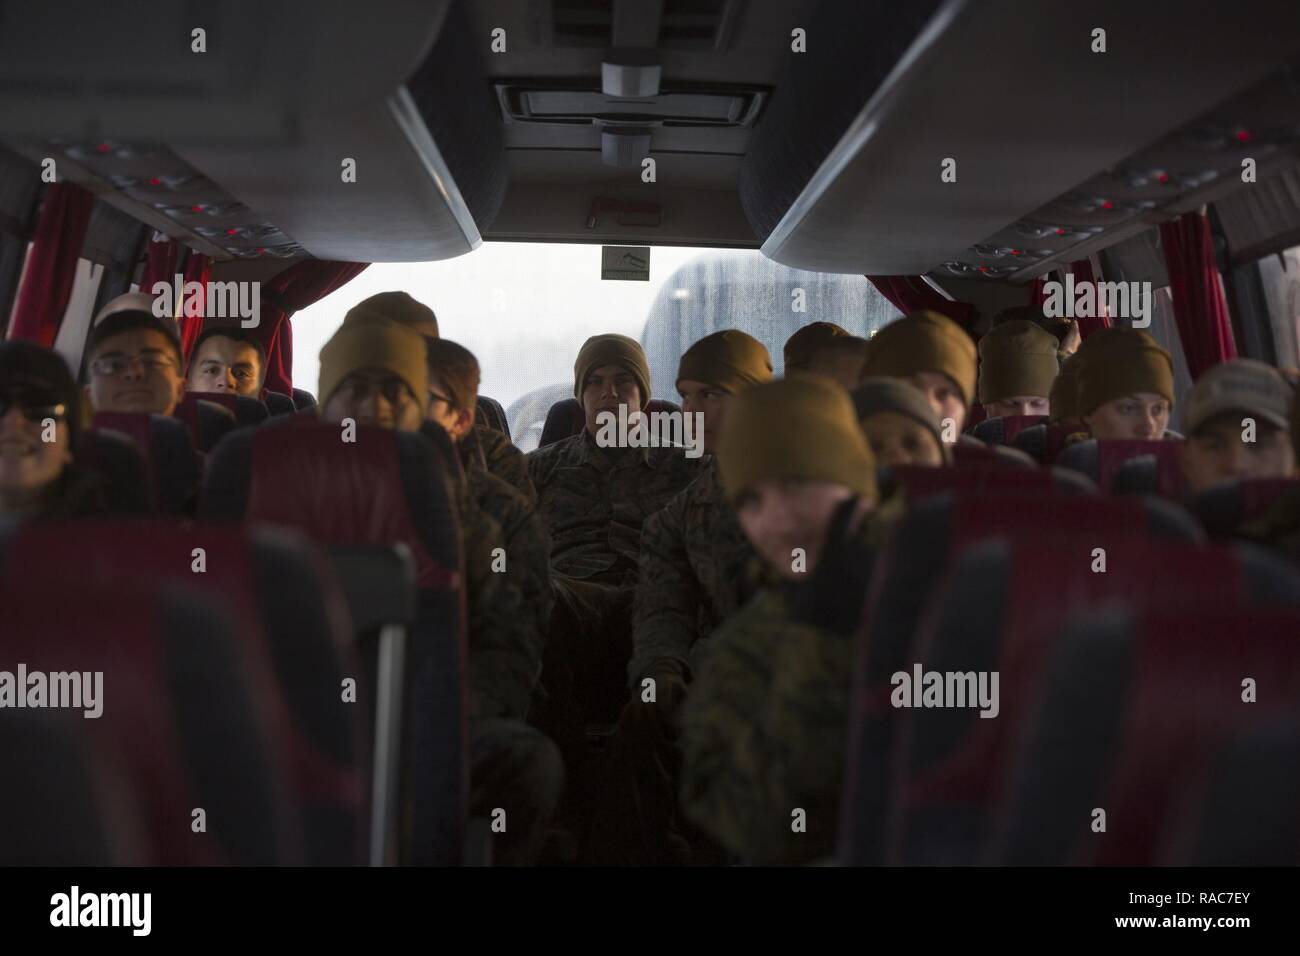 U.S. Marines board a bus on the tarmac headed to garrison at Vaernes Garnison, Norway, Jan. 16, 2017. The Marines with Black Sea Rotational Force 17.1 arrived at Vaernes Garnison early in the morning as part of Marine Rotational Force Europe 17.1. Stock Photo